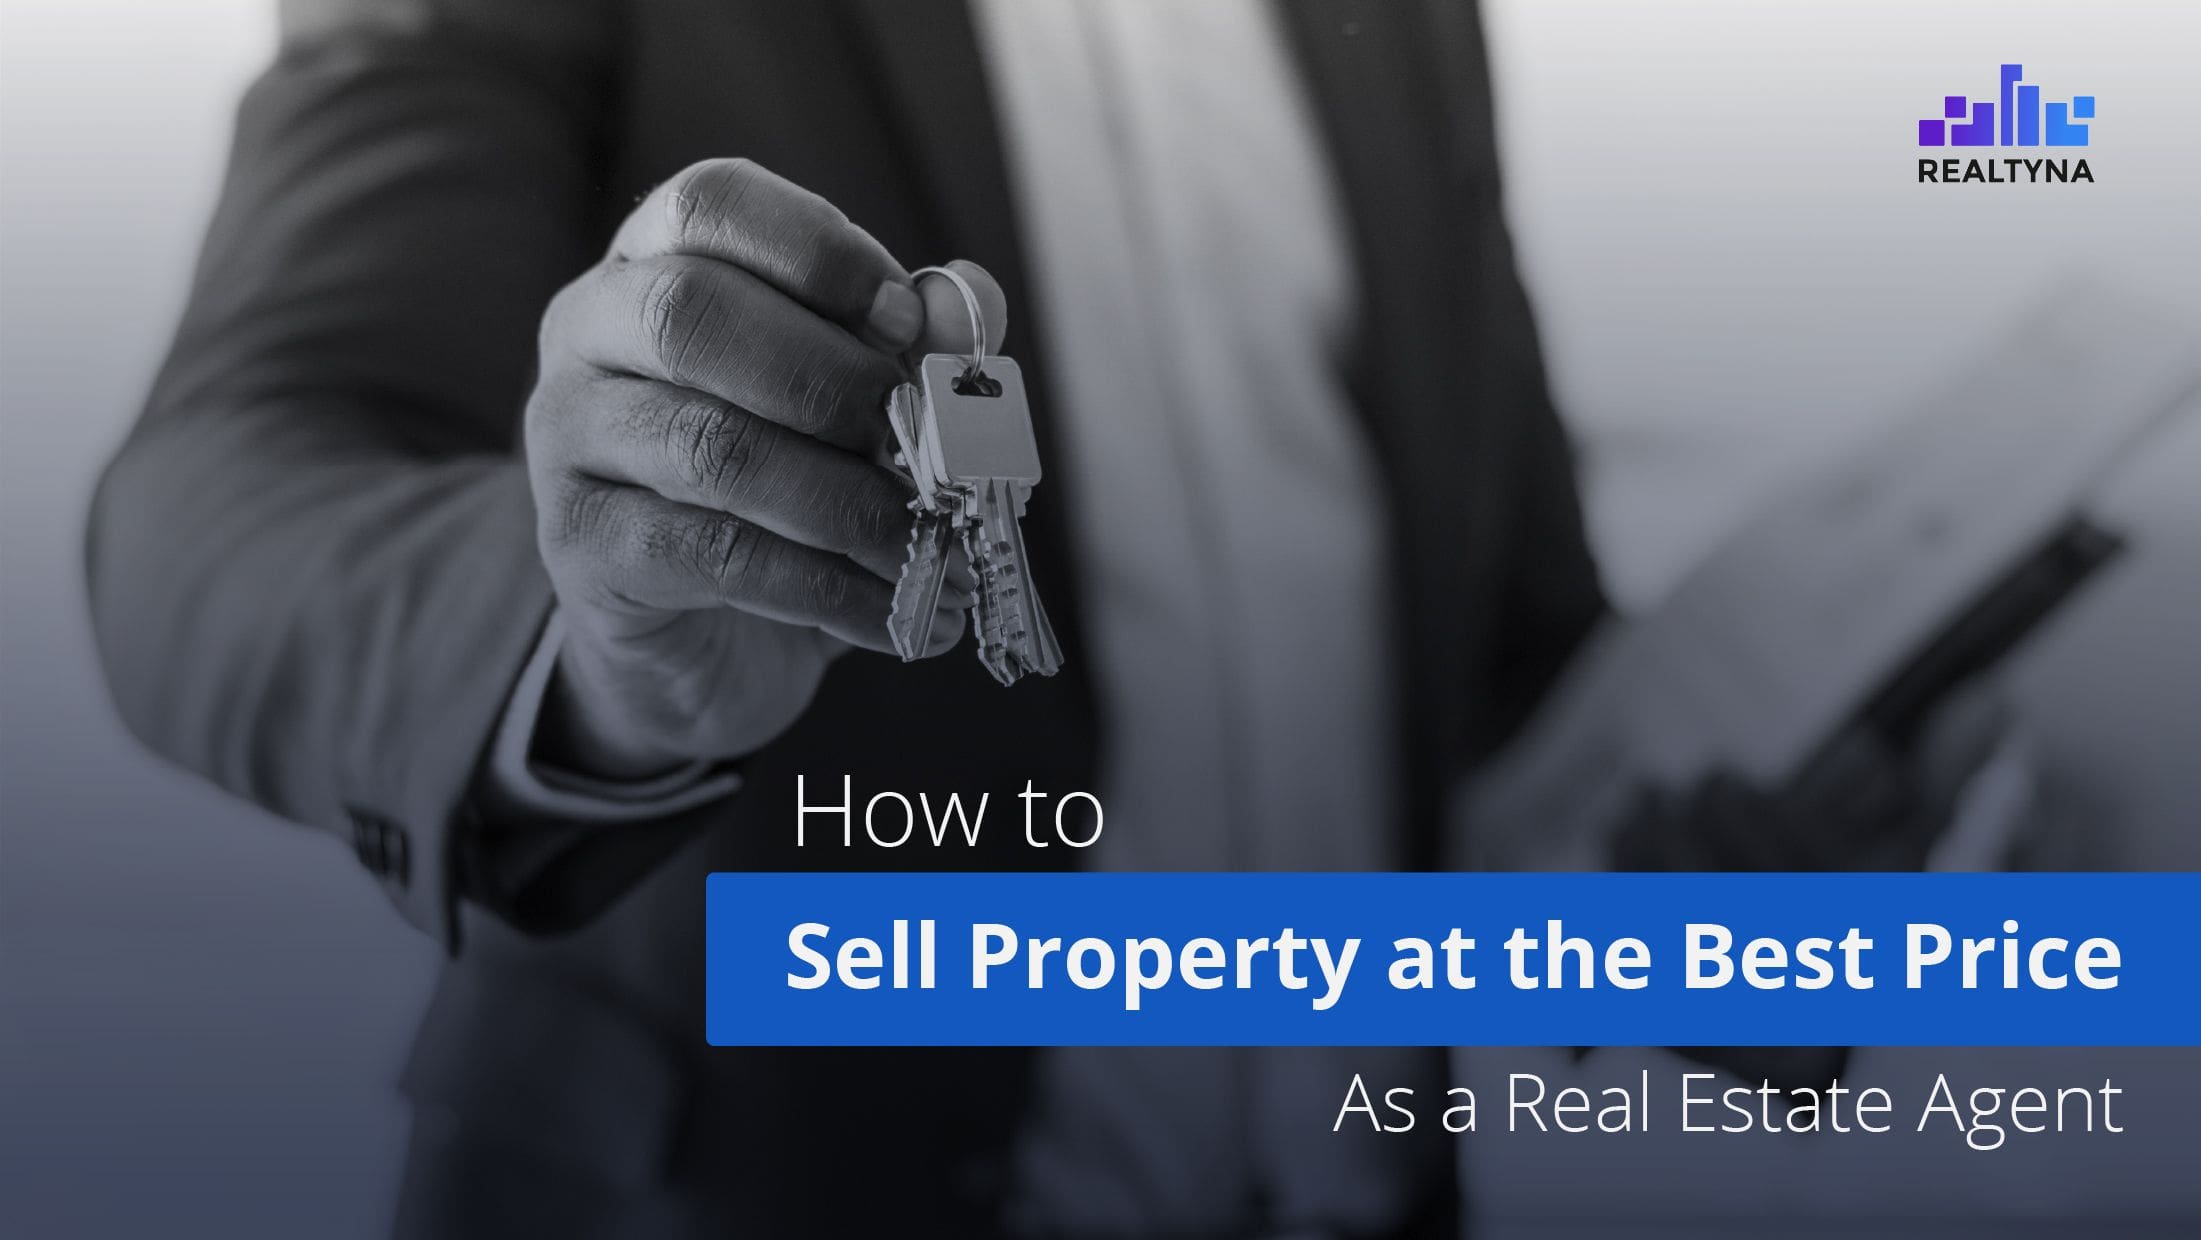 Sell Property as a Real Estate Agent